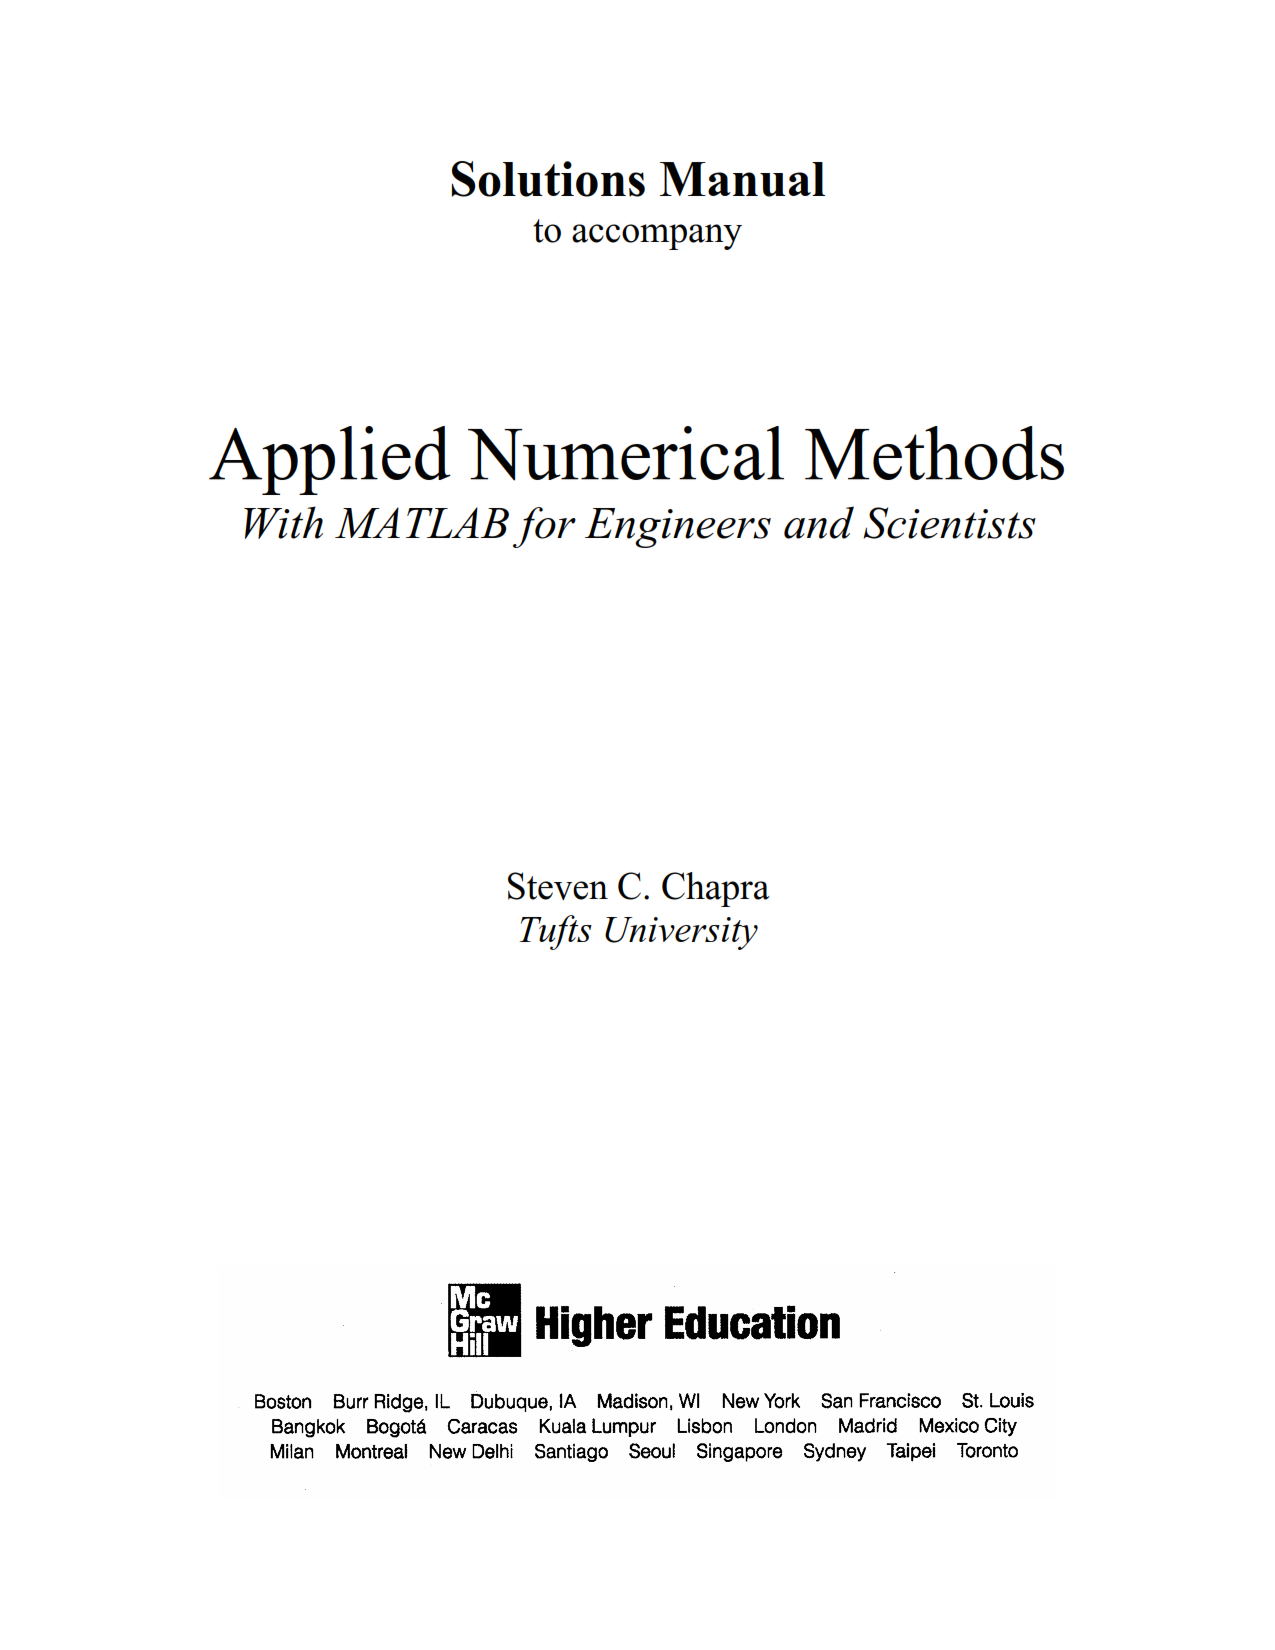 Download free Applied Numerical Methods With MATLAB for Engineers & Scientists 3rd edition Solution Manual By Steven Chapra eBook pdf 👍